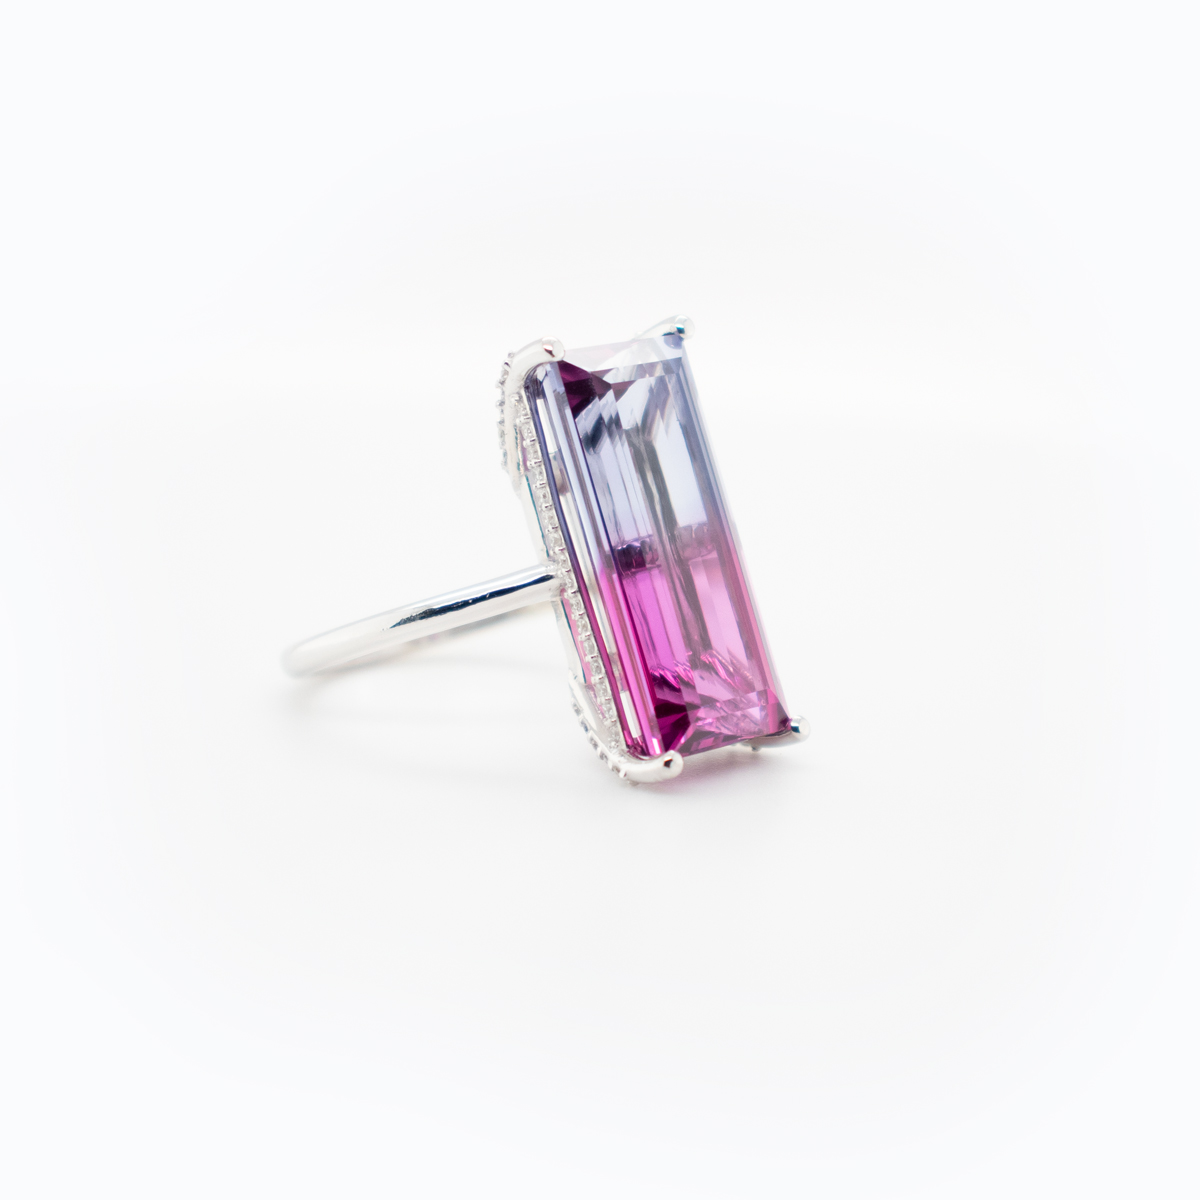 Bi-color Violet Tourmaline Fashion Ring with Diamond Accents, 18k Gold